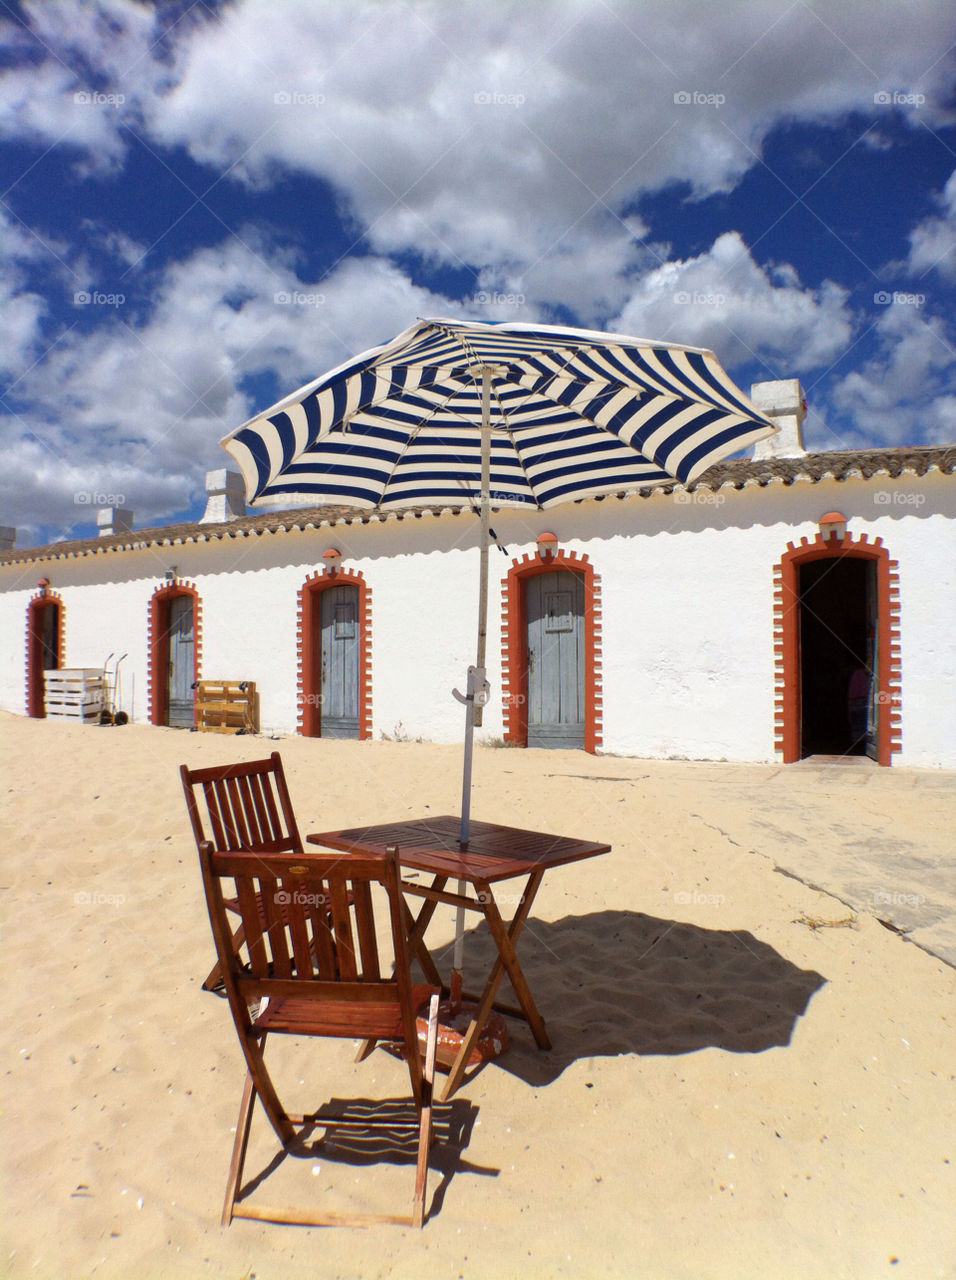 clouds house sands umbrella by themuttley